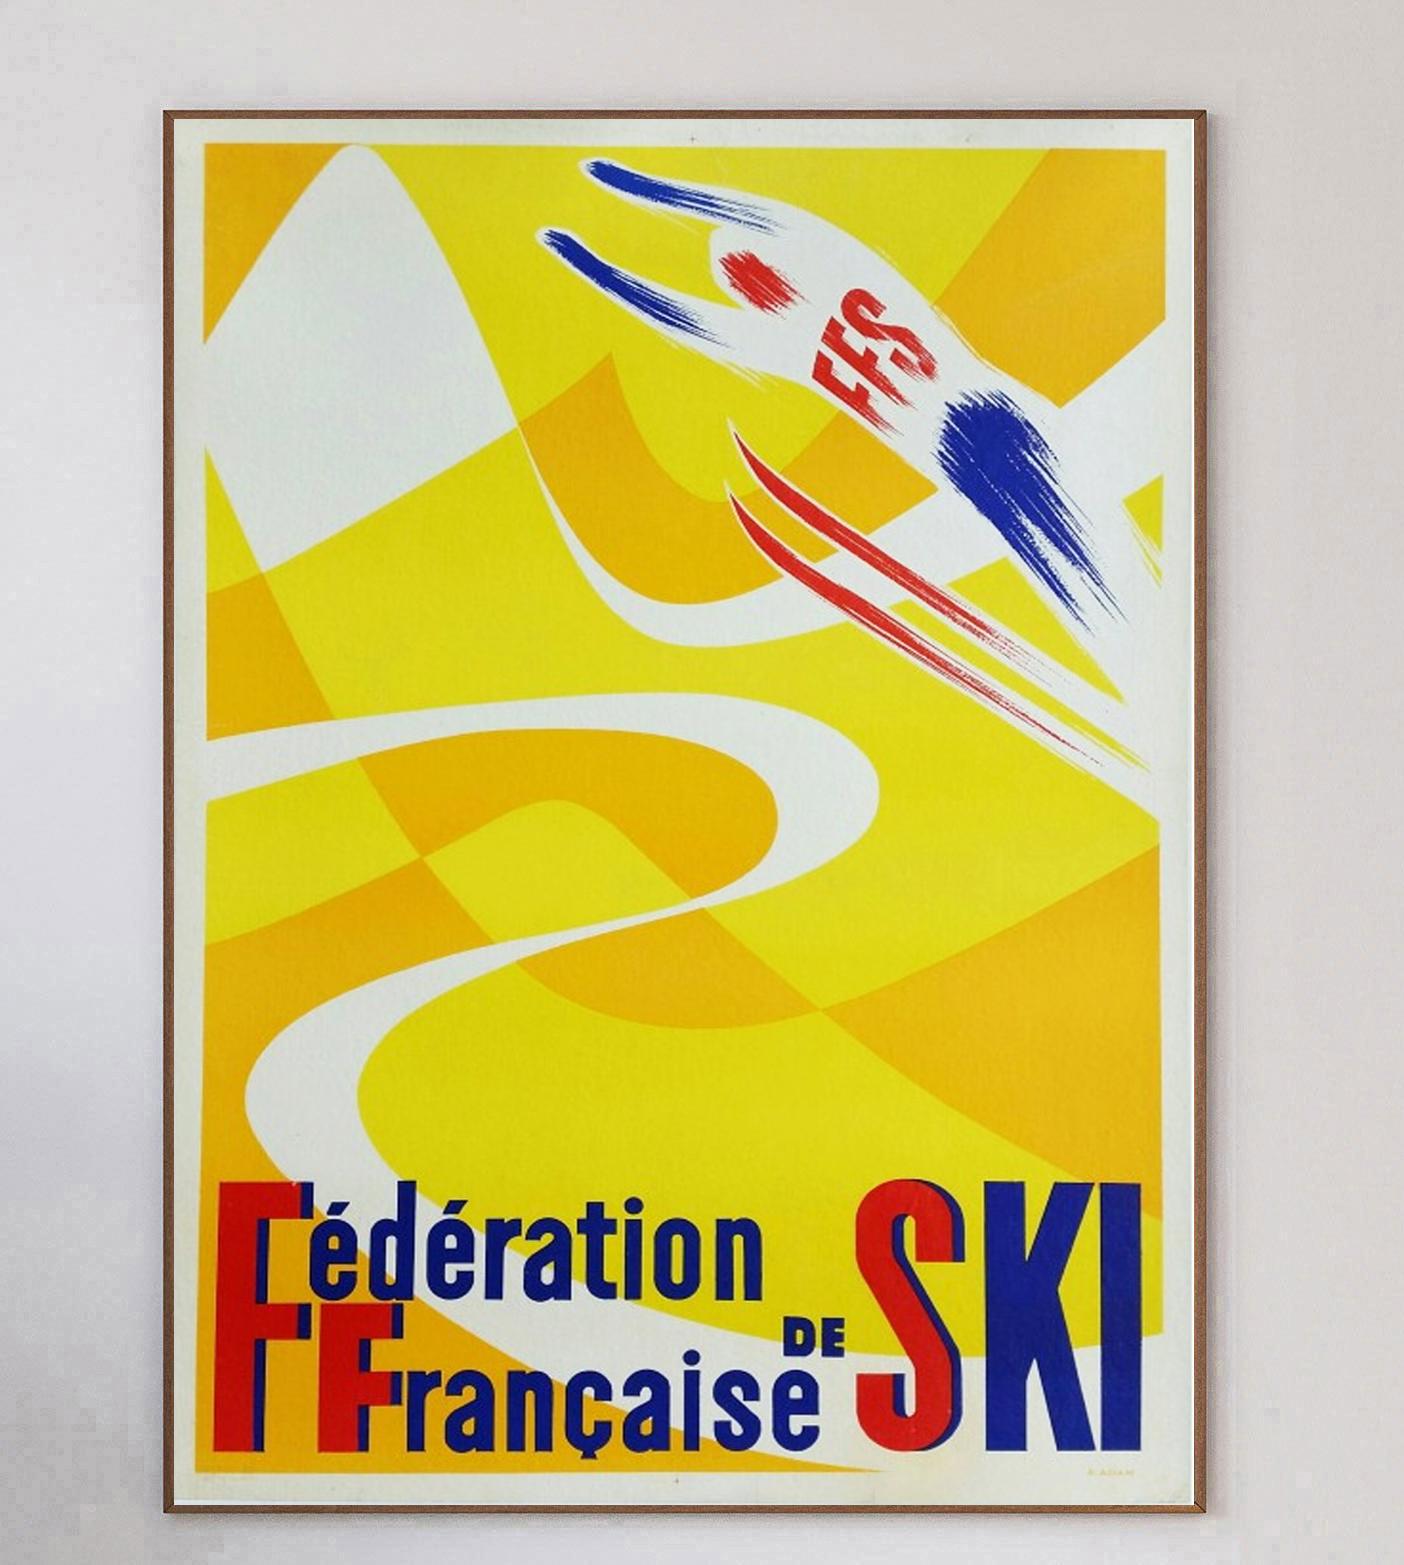 Wonderful poster designed by Adam R. for the Federation Francaise de Ski. Created in 1950, this bright and colourful poster depicts a skier jumping high. The FFS was founded in 1924 and continues to this day.

This rare lithographic poster is in